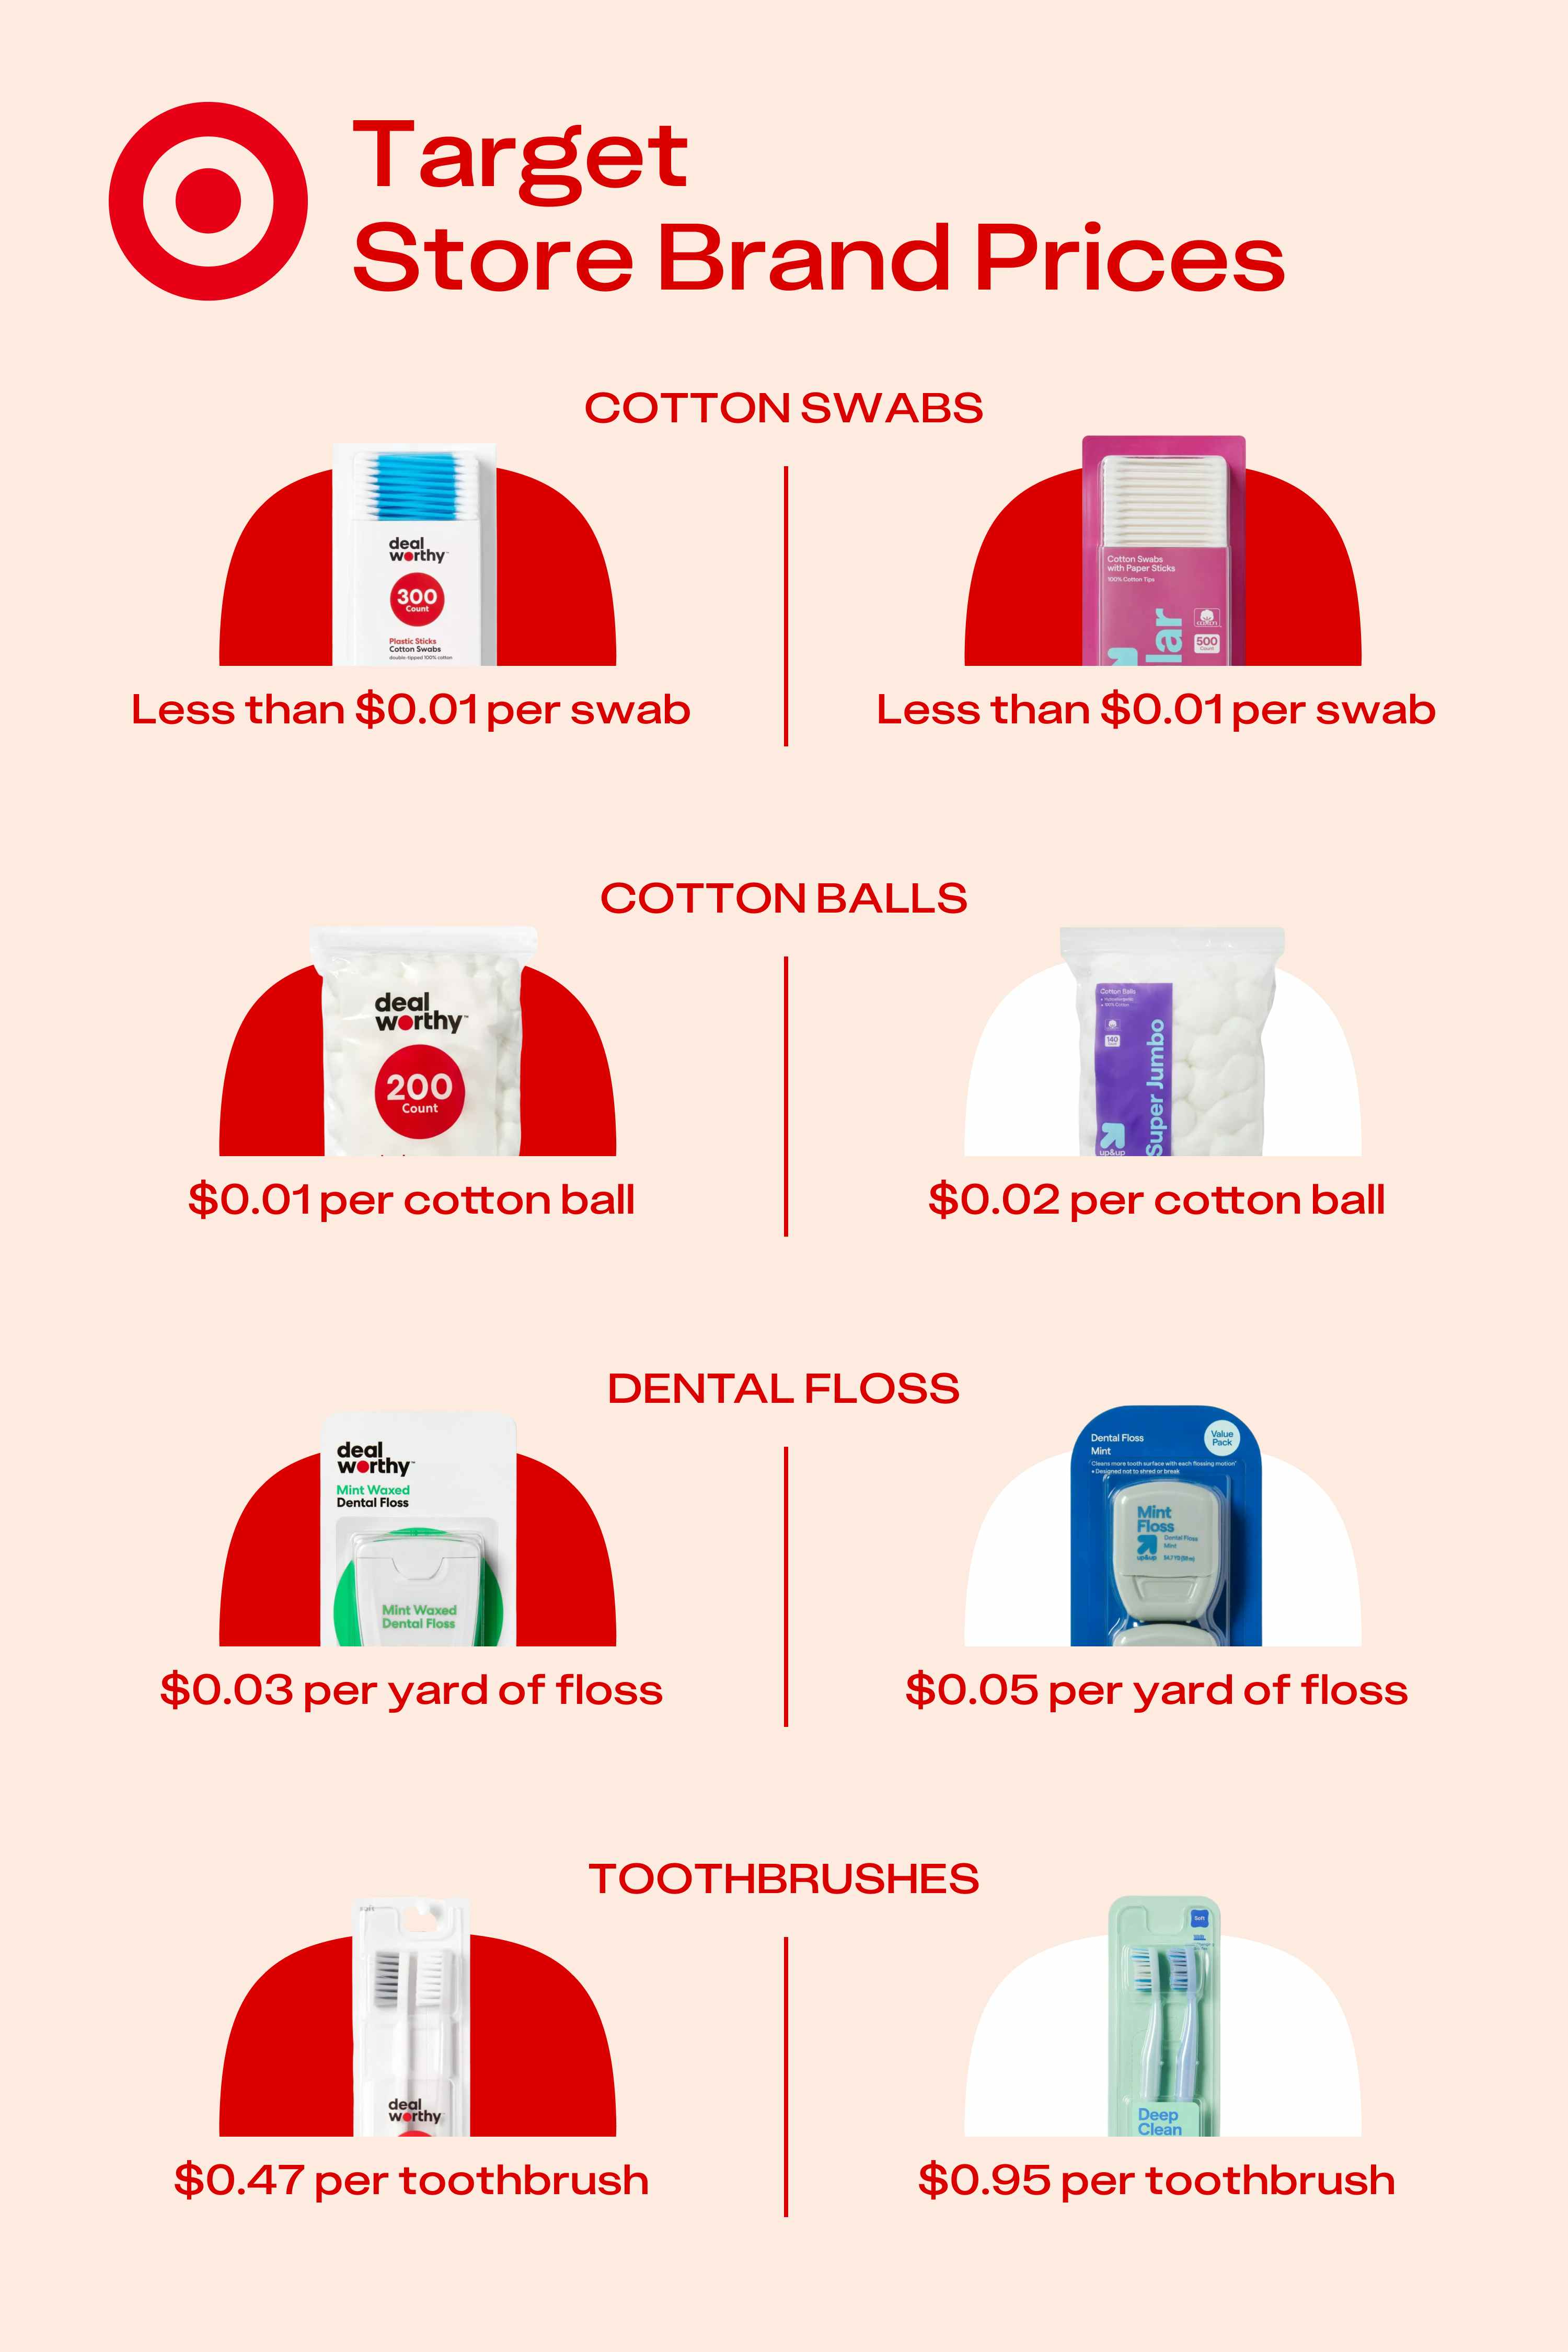 A comparison of target dealworthy prices to target up and up prices for cotton swabs, cotton balls, dental floss, and toothbrushes